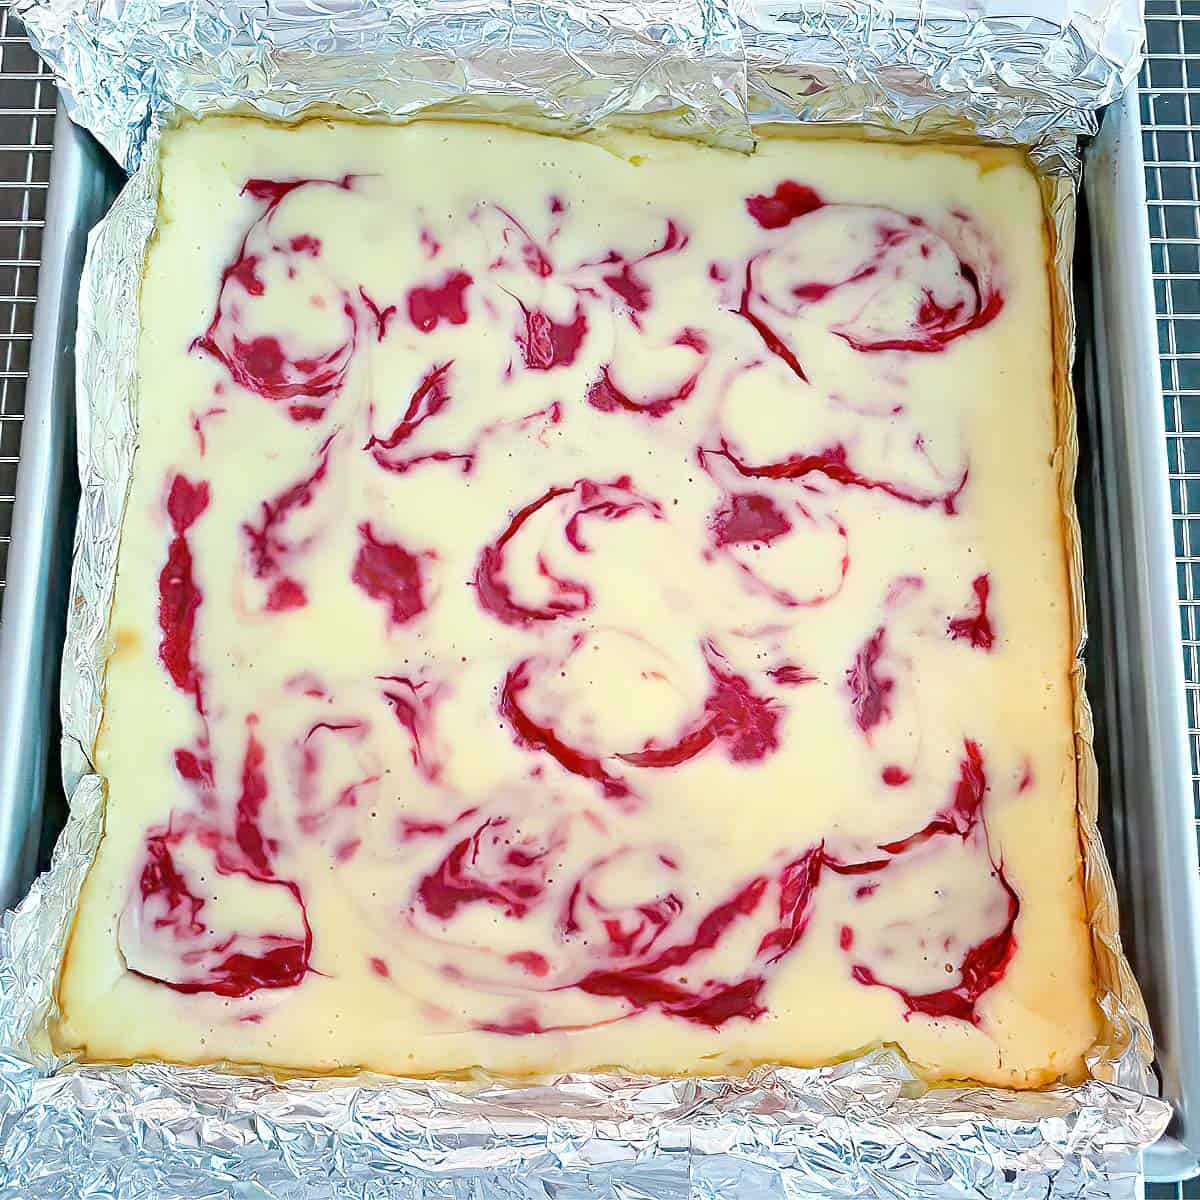 Cheesecake cooling after being baked.